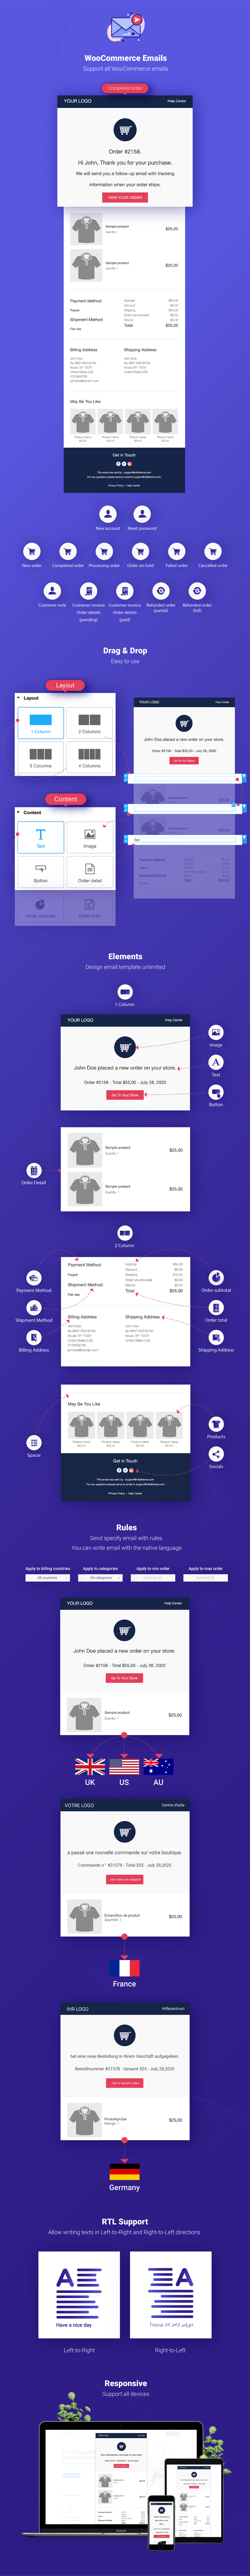 Infographic WooCommerce Email Template Customizer